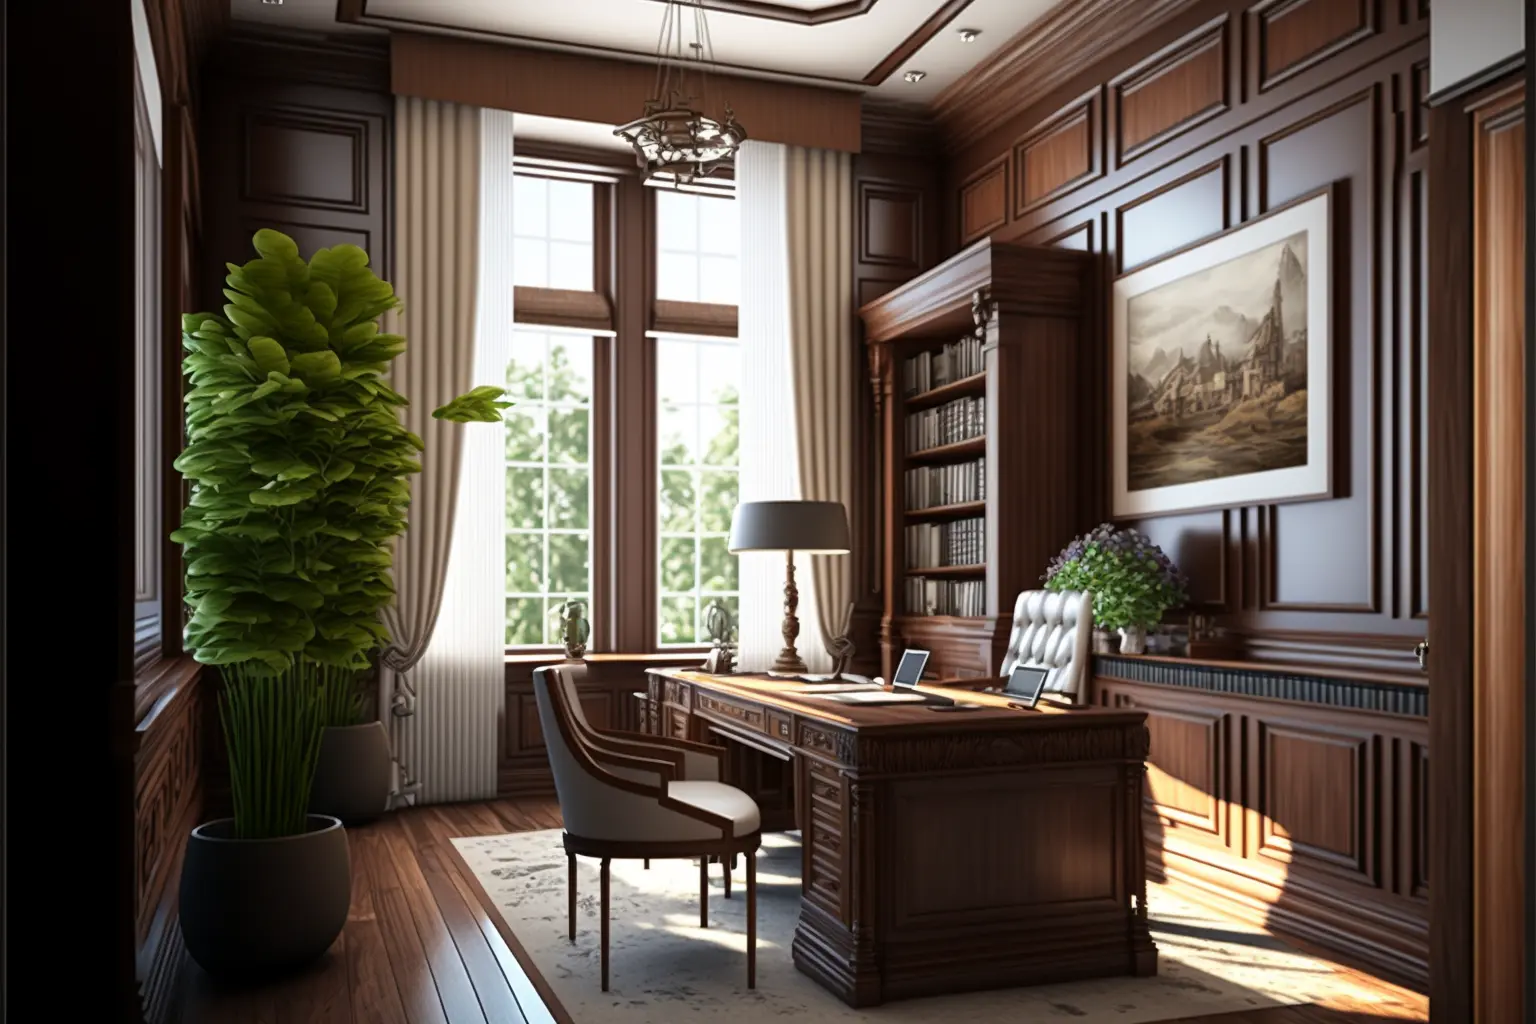 Interior Design, a perspective of of a study room with mahogany walls and a large desk of walnut wood, large windows with natural light, Light colors, plants, modern furniture, classical interior design